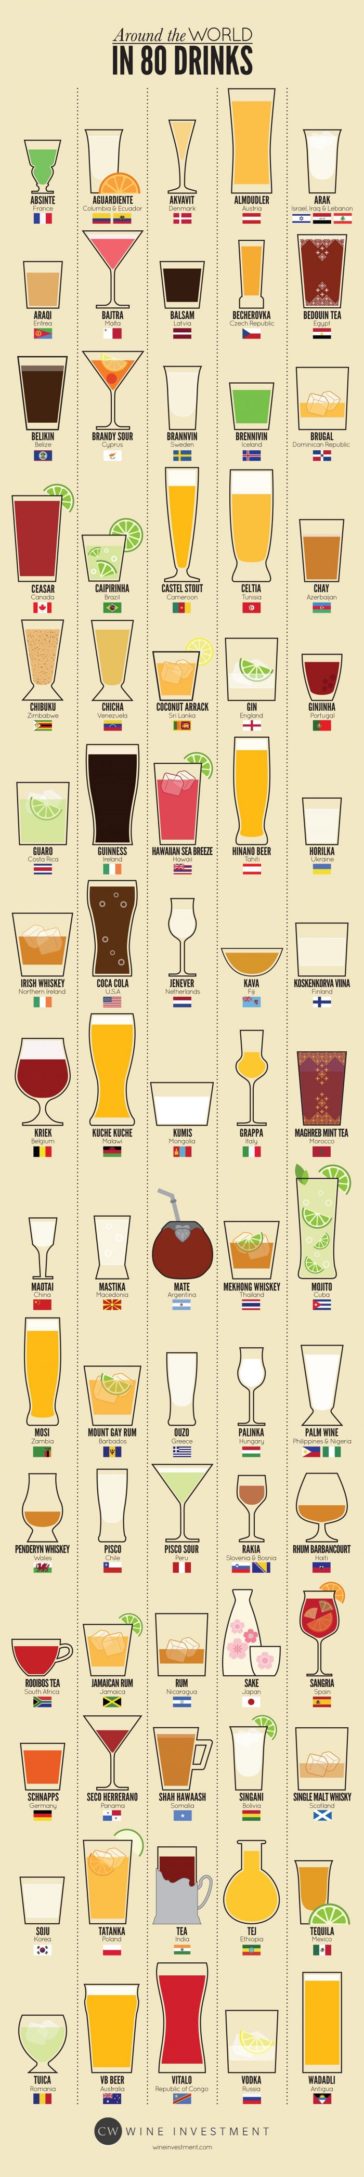 Visual : Around the world in 80 drinks - Infographic.tv - Number one ...